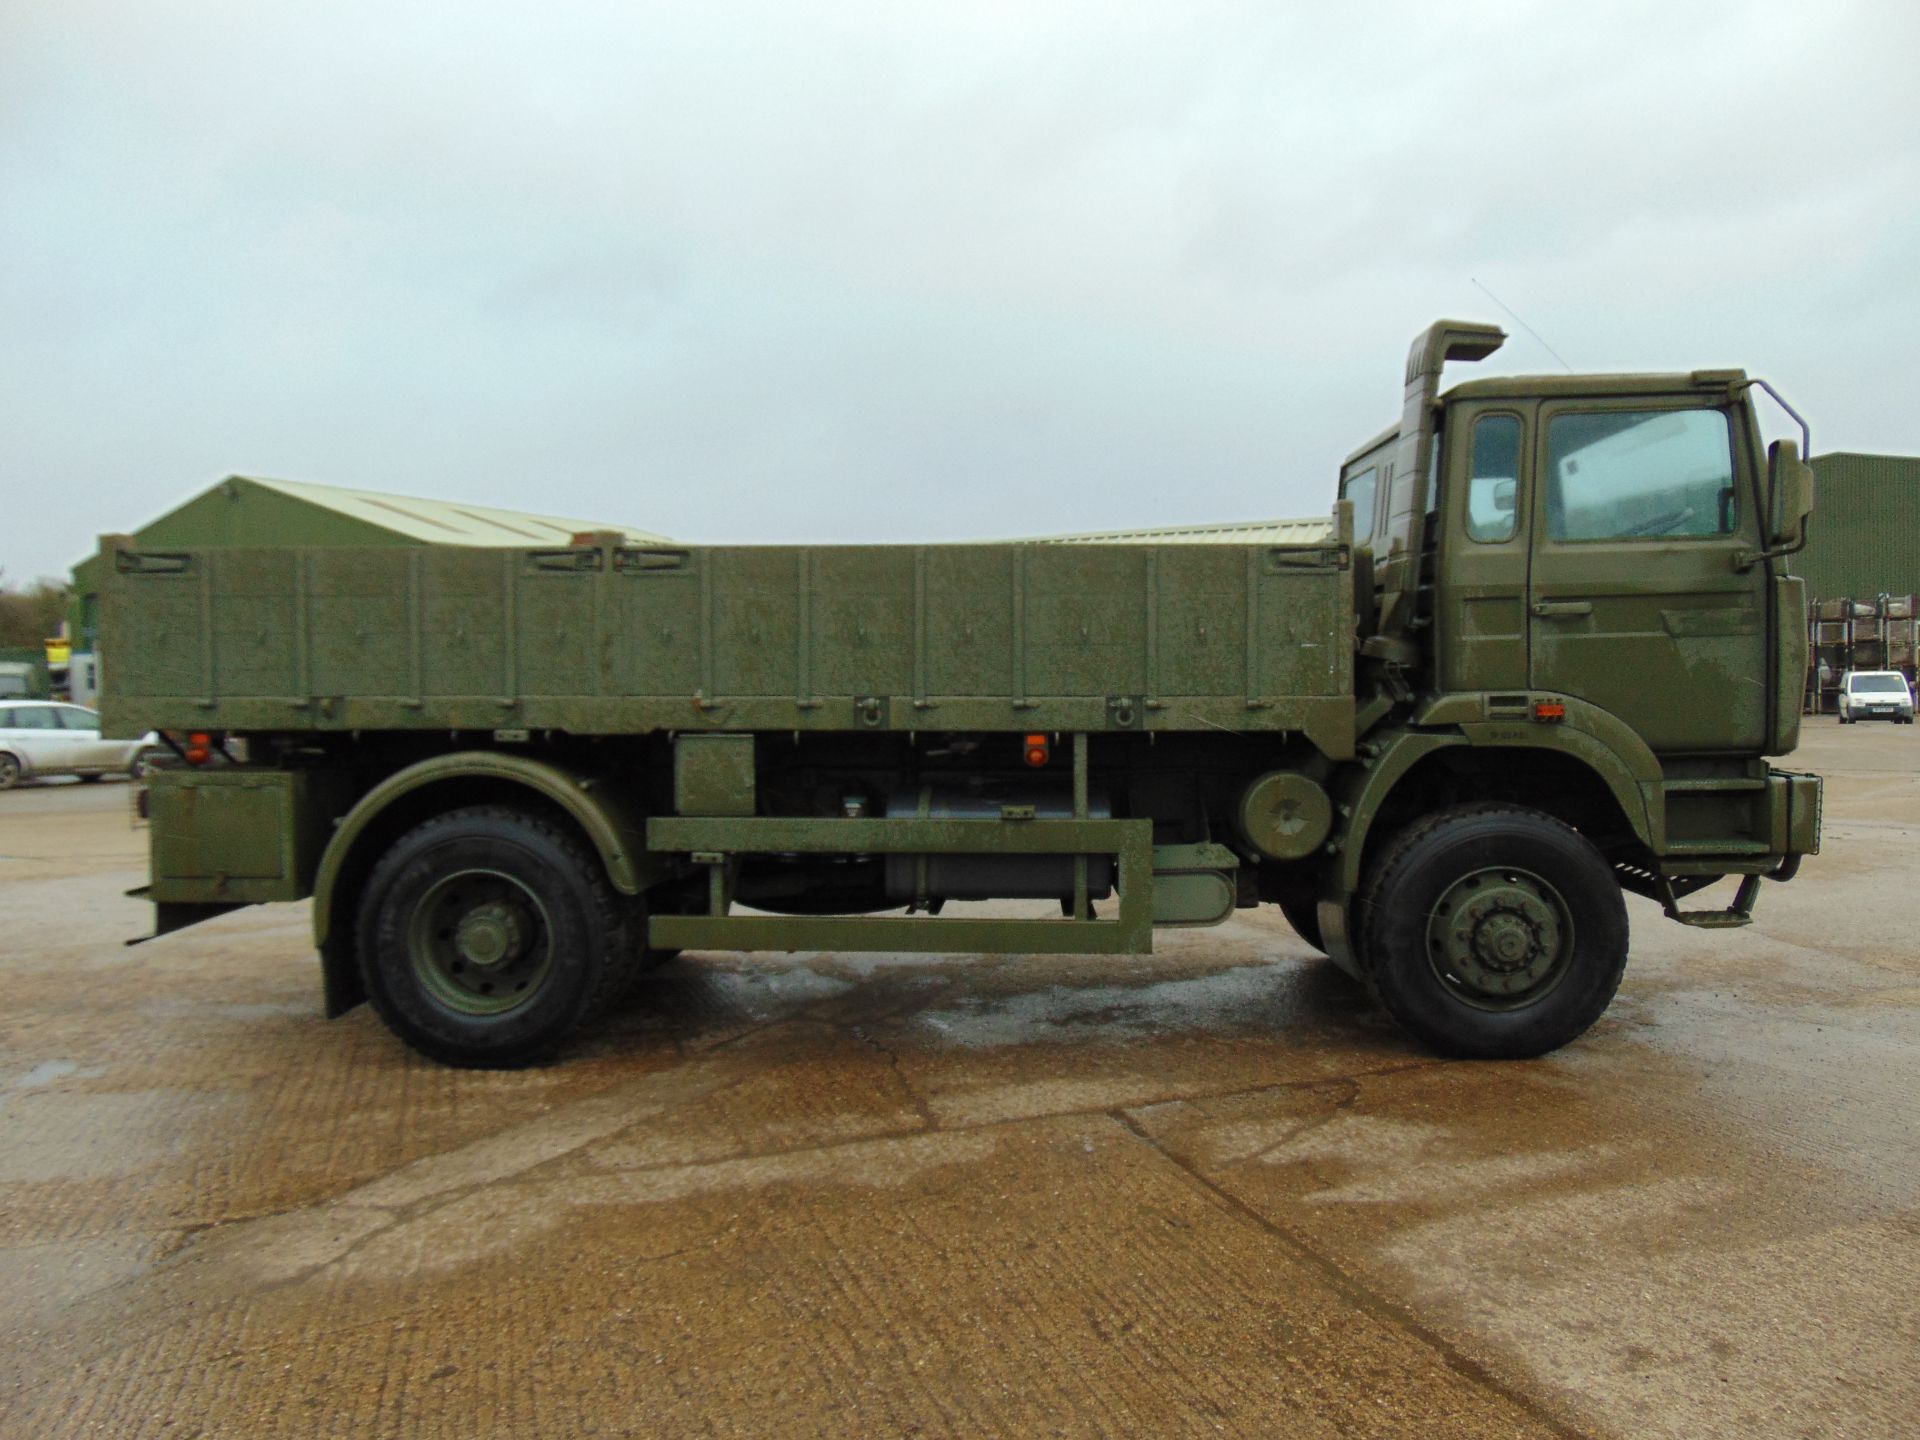 Renault G300 Maxter RHD 4x4 8T Cargo Truck with fitted winch which - Image 5 of 15